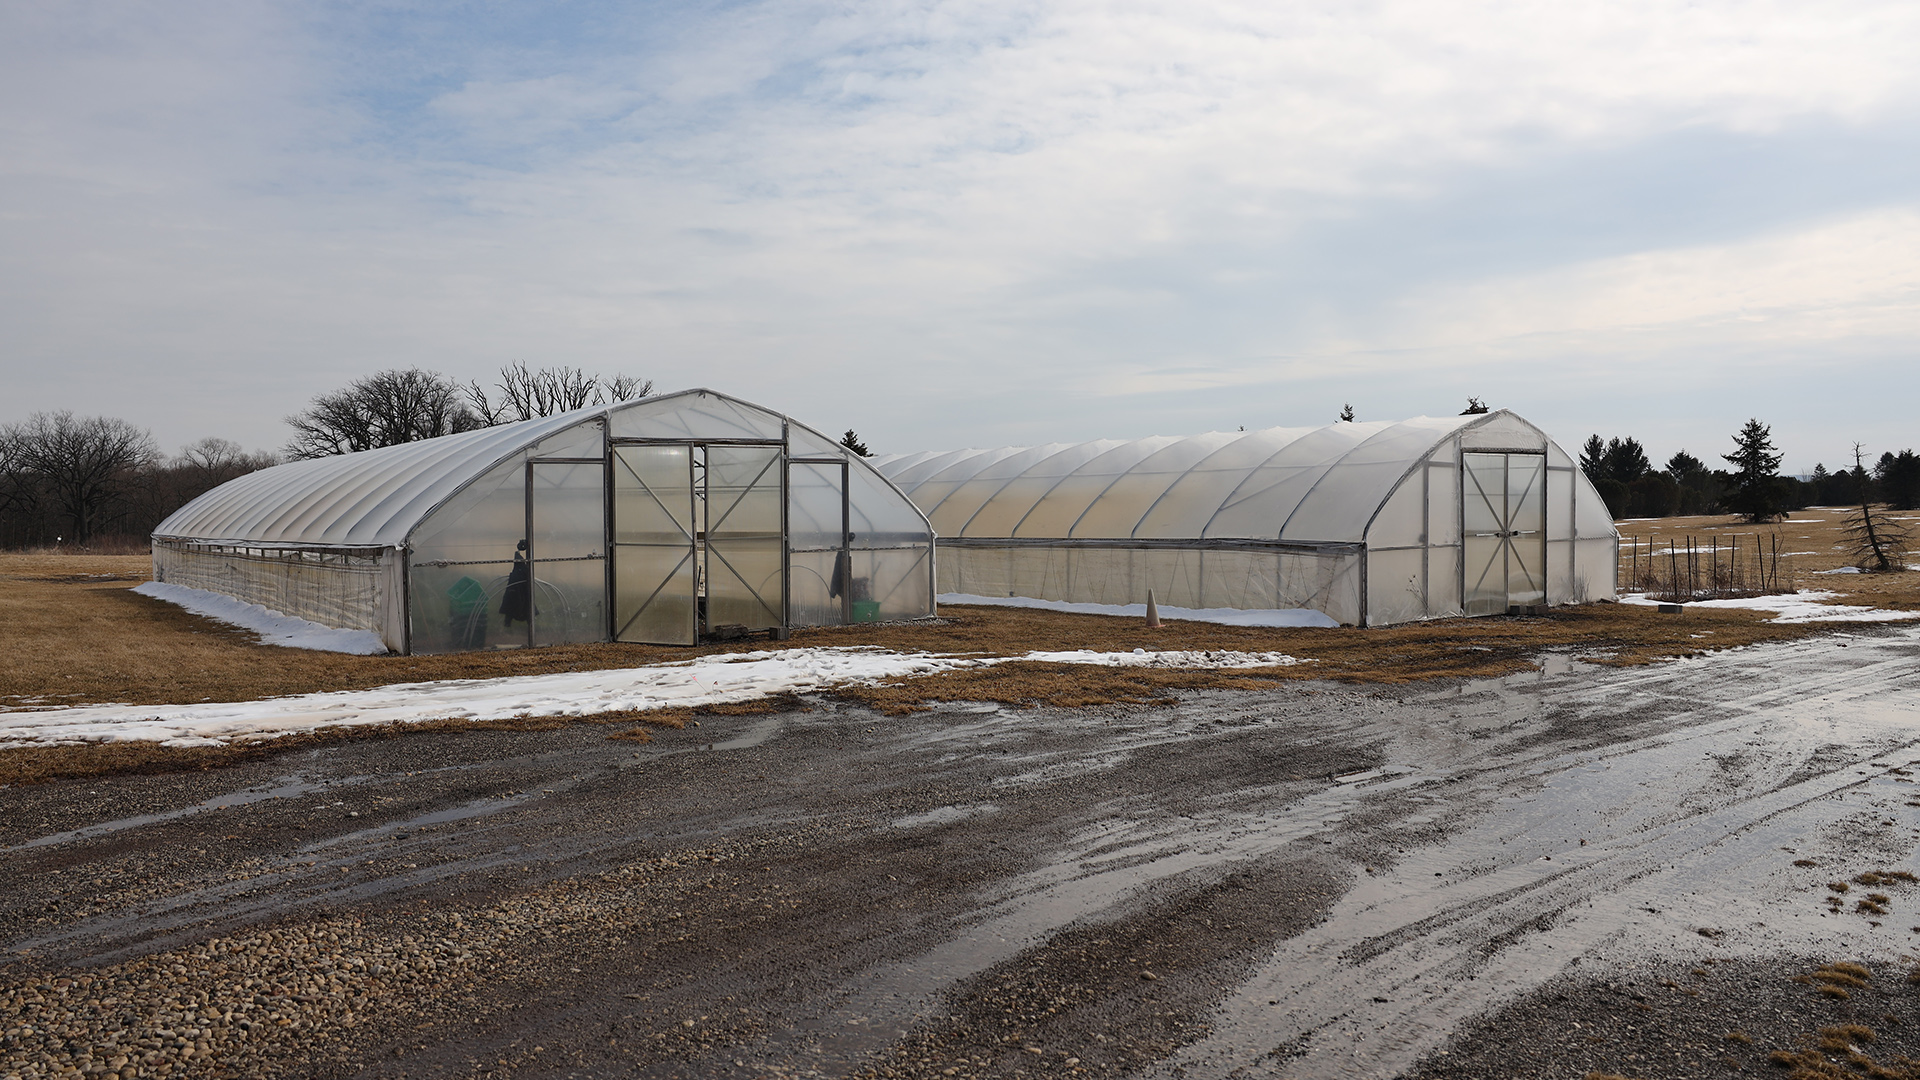 Two hoop houses constructed with wood-and-metal frames and plastic walls and rooves stand in a field with patches of of snow, with a wet gravel road in the foreground and trees in the background.